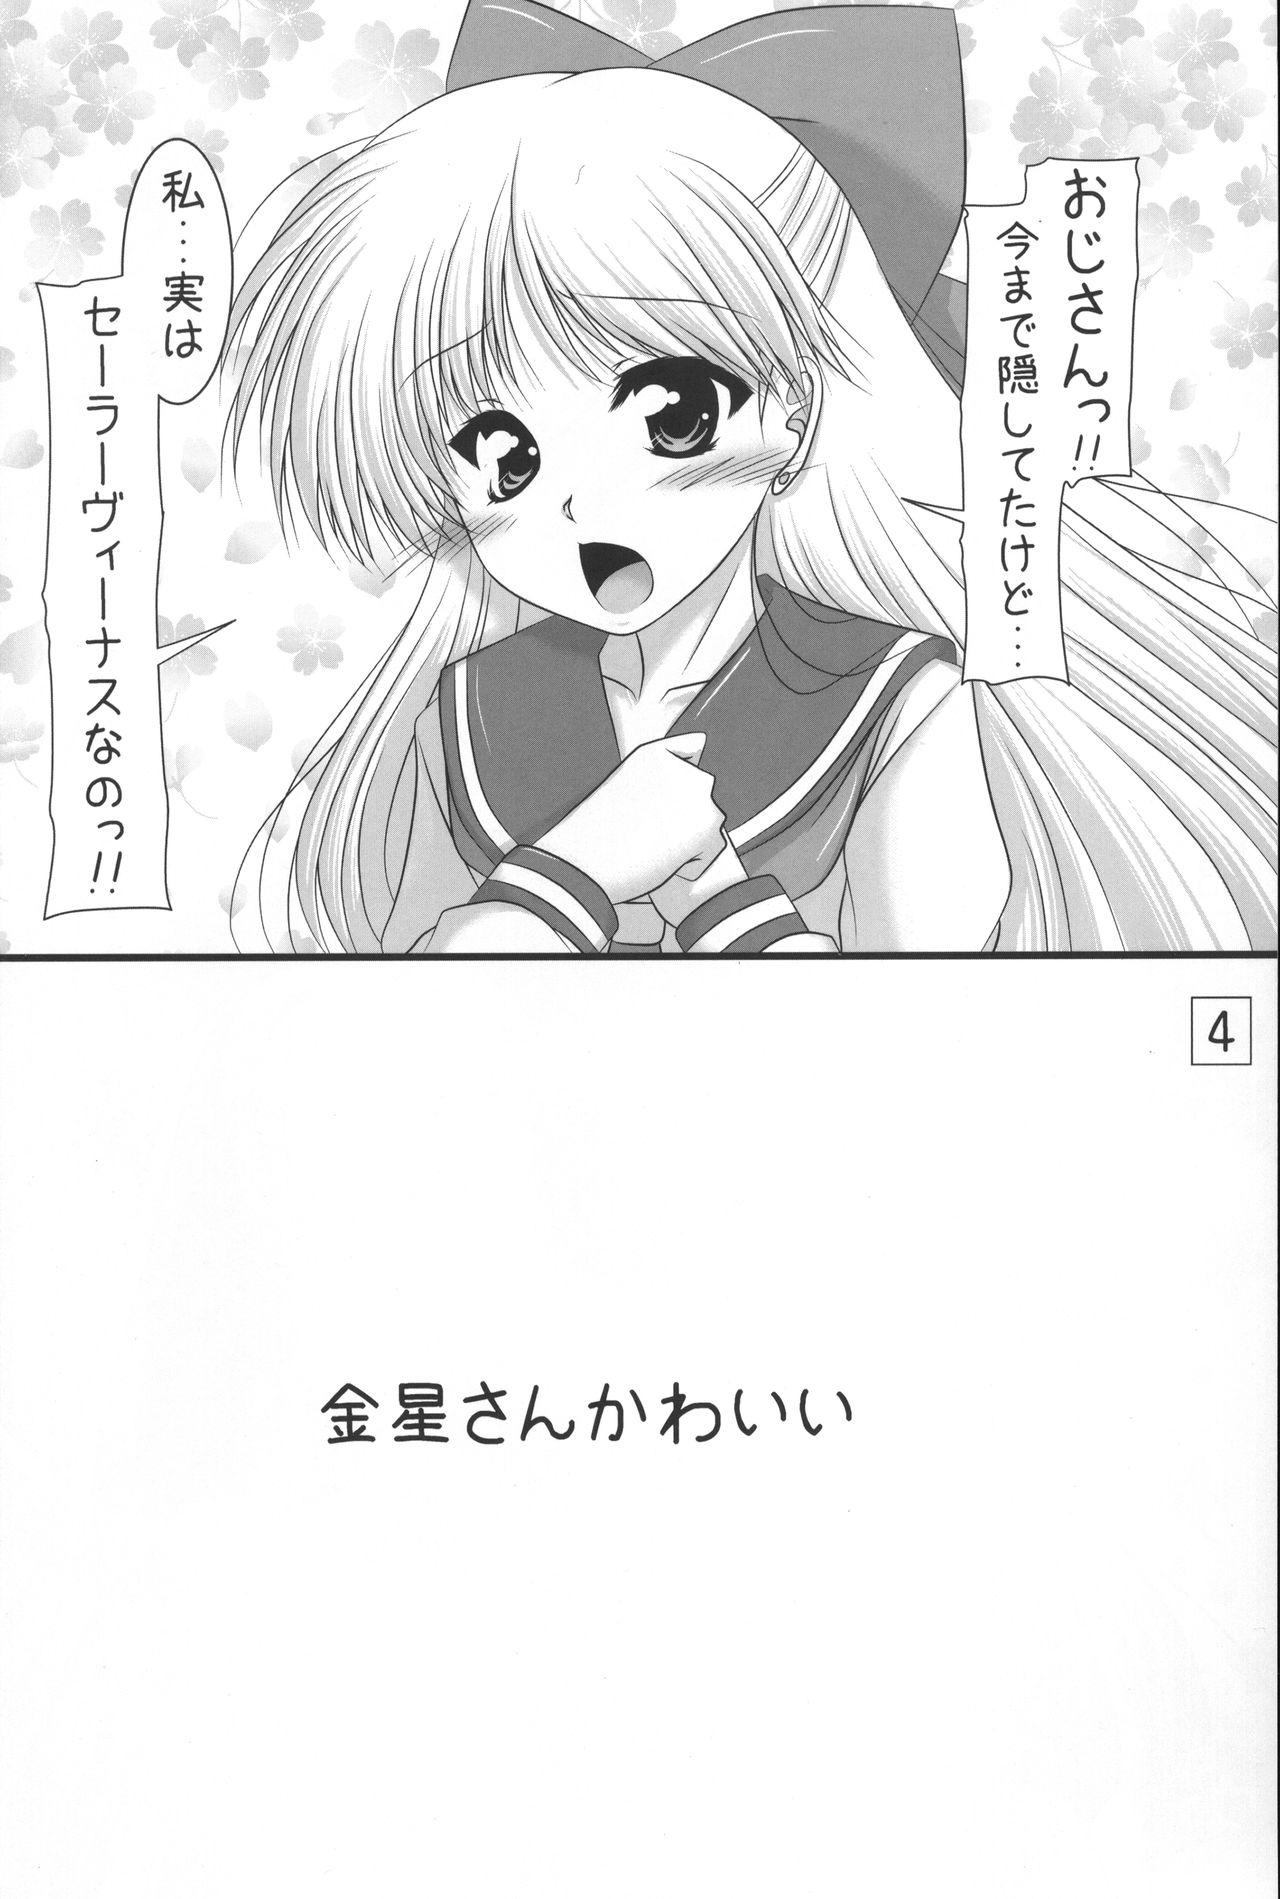 Hardcorend Kiniro Star Light - Sailor moon Old And Young - Page 3